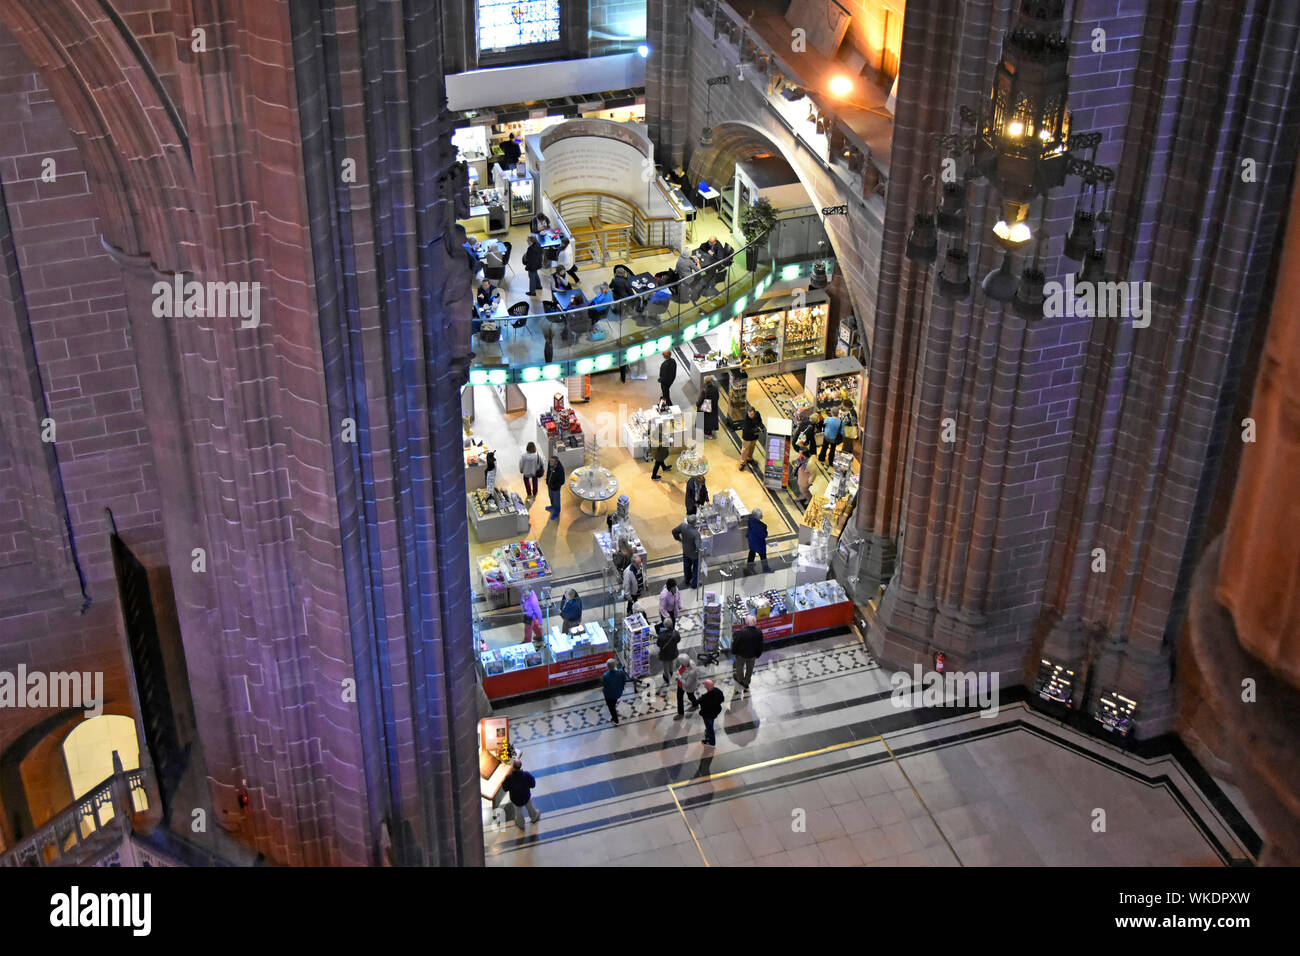 Aerial view looking down from high above on people shopping in gift shop & cafe nave of Liverpool Anglican cathedral coloured wall lighting England UK Stock Photo